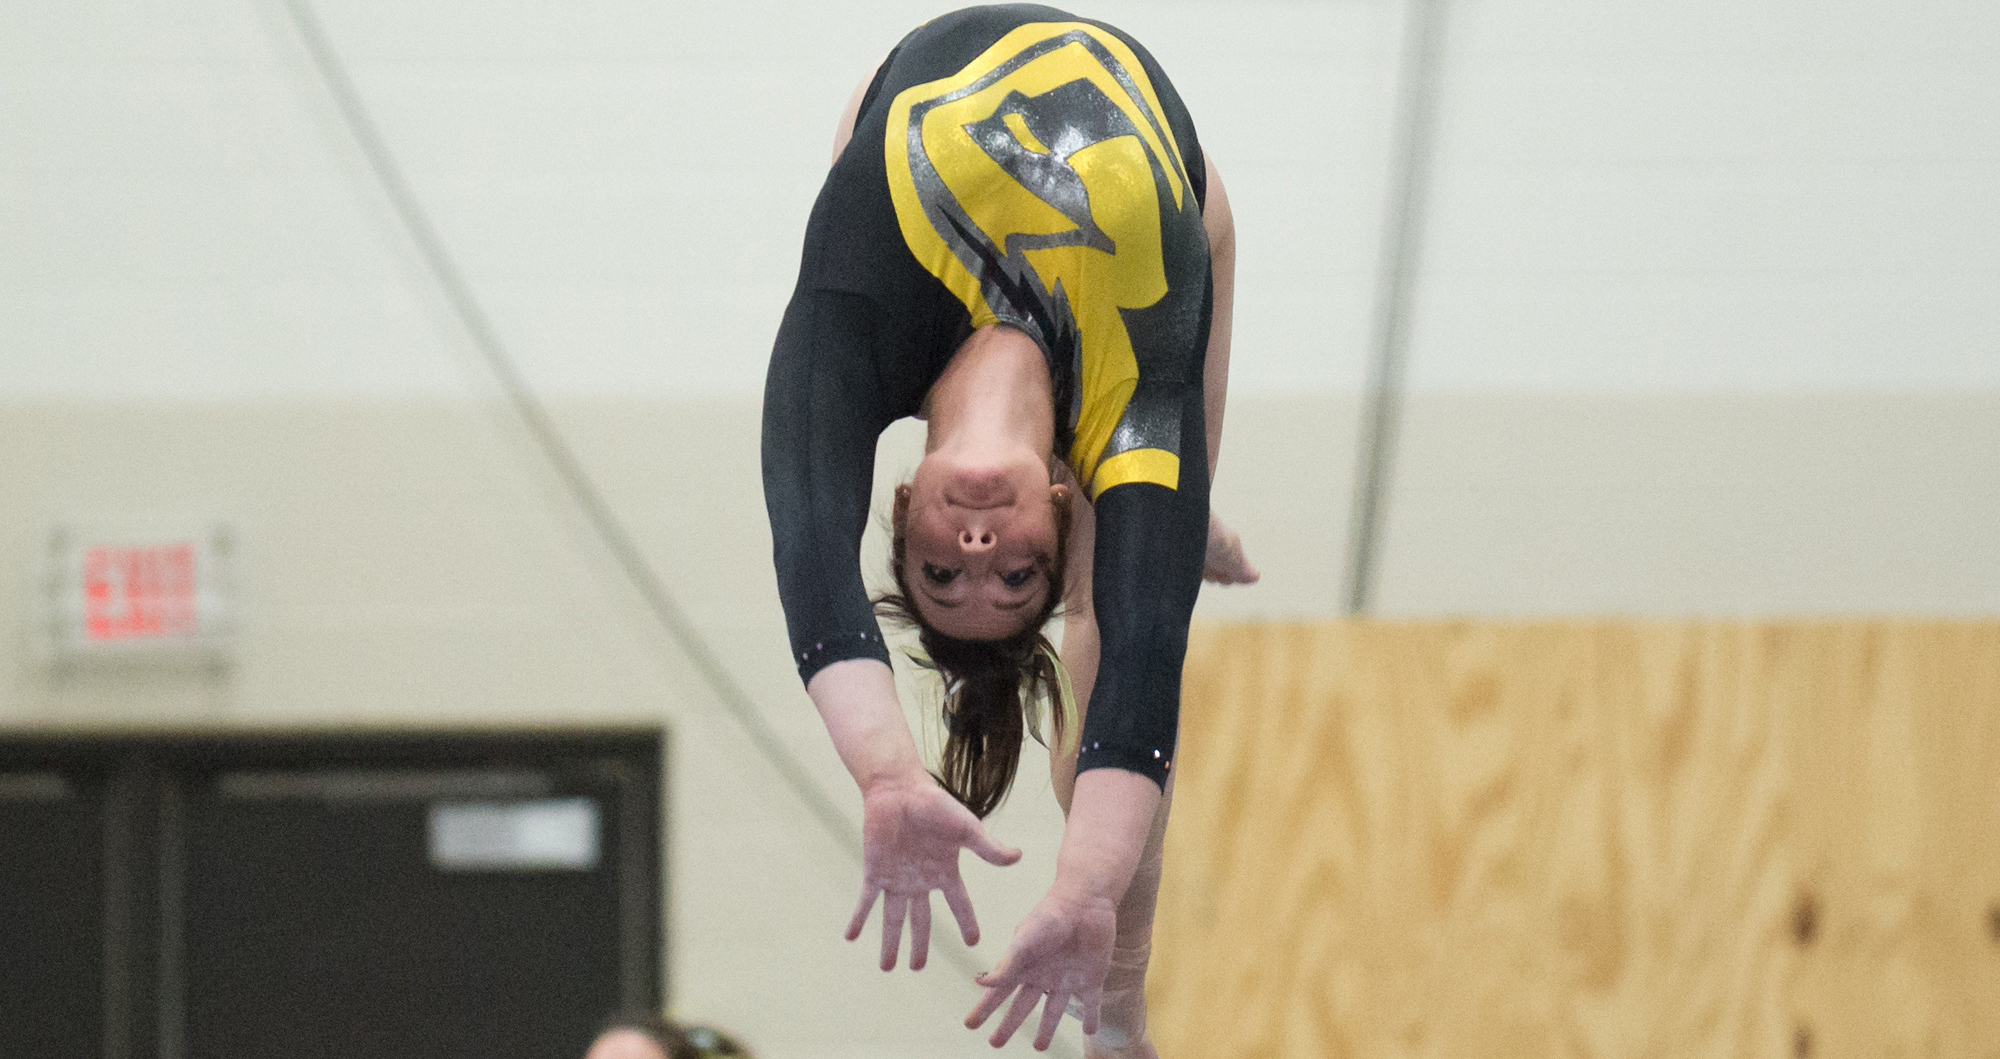 Kasandra Stamopoulos recorded a 10th-place score of 9.00 on the balance beam.